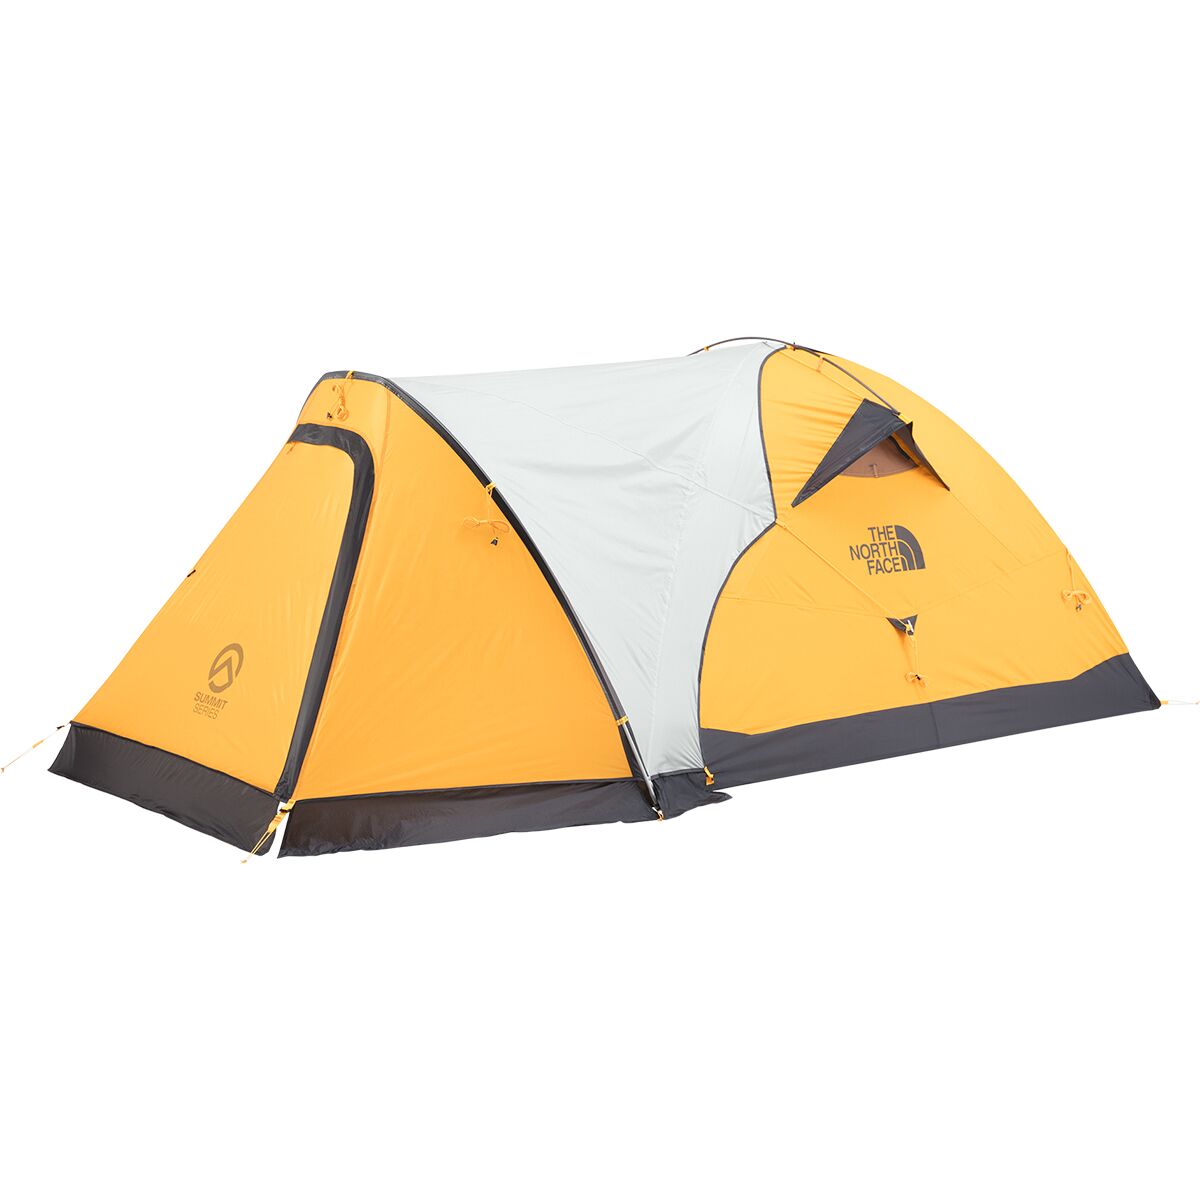 The North Face Assault 3 FUTURELIGHT Tent: 3-Person 4-Season - Hike & Camp